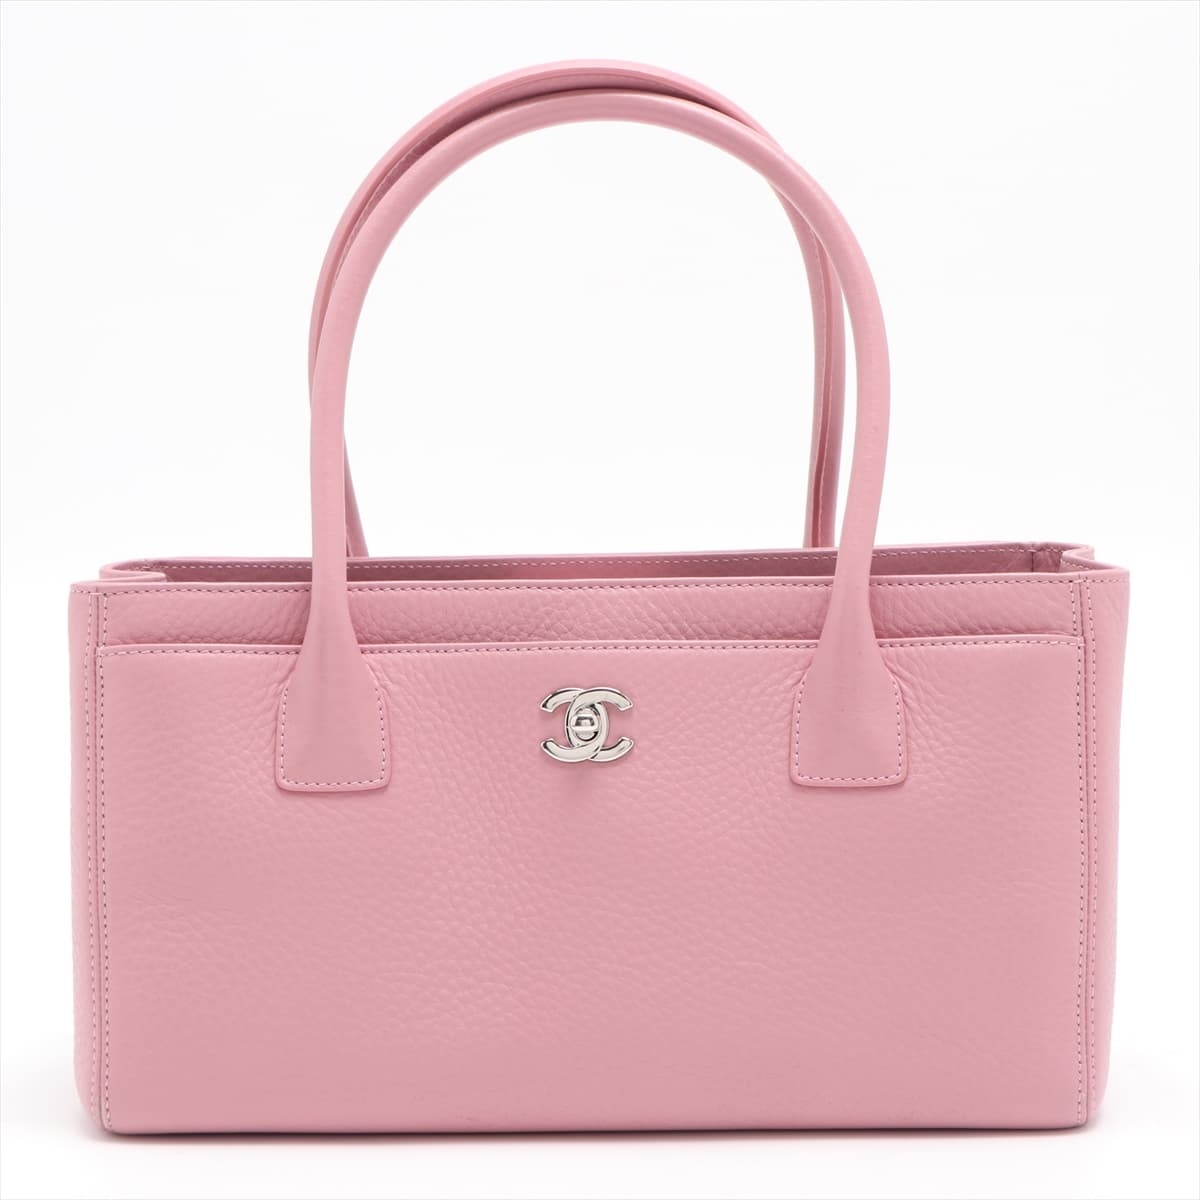 Chanel Executive Leather Tote bag Pink Silver Metal fittings 20XXXXXX Comes with divider pouch